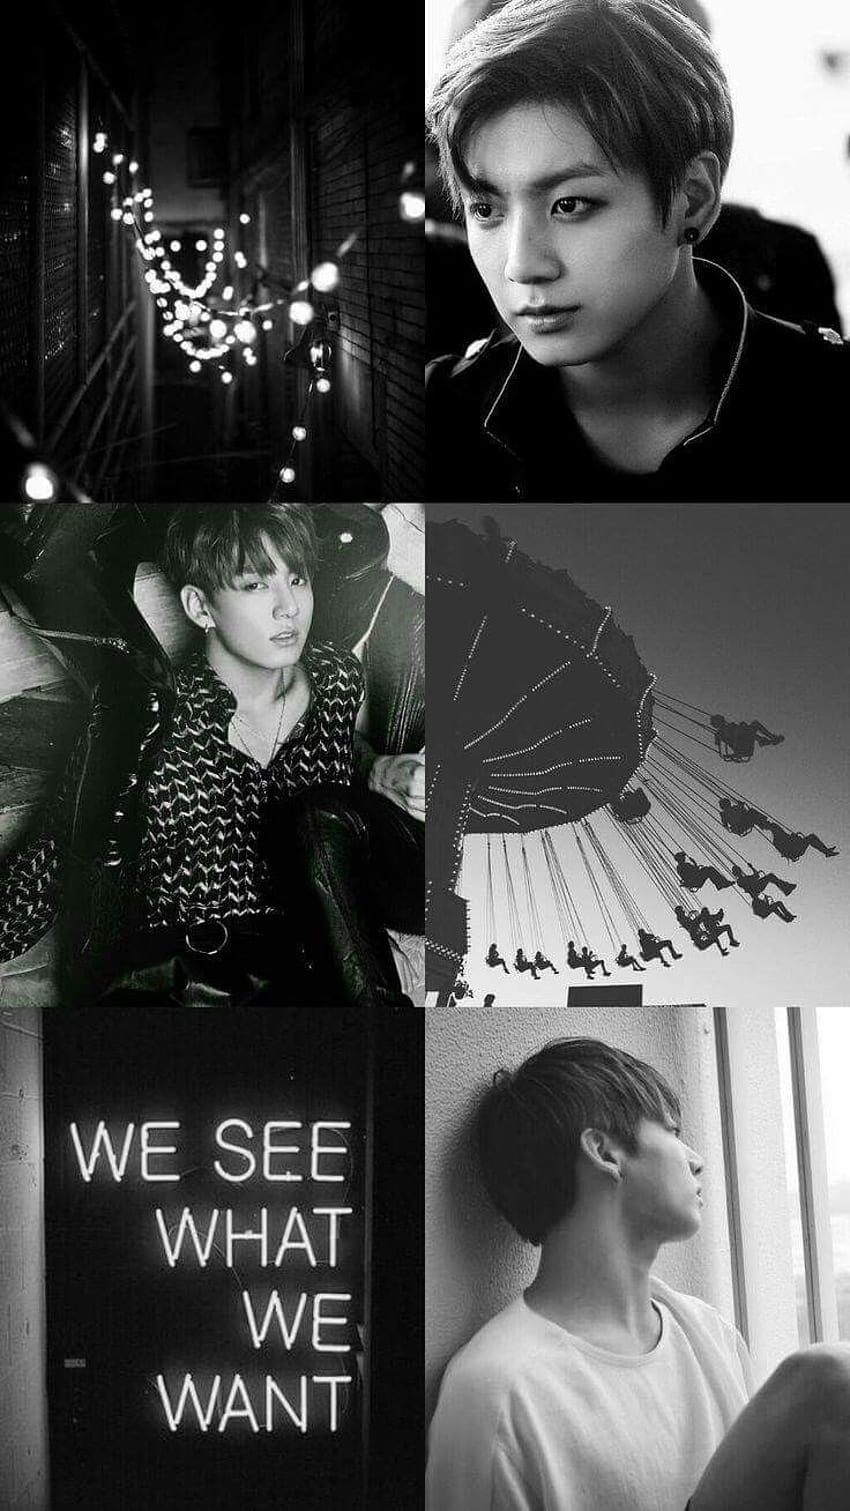 A collage of pictures with different words and phrases - Jungkook